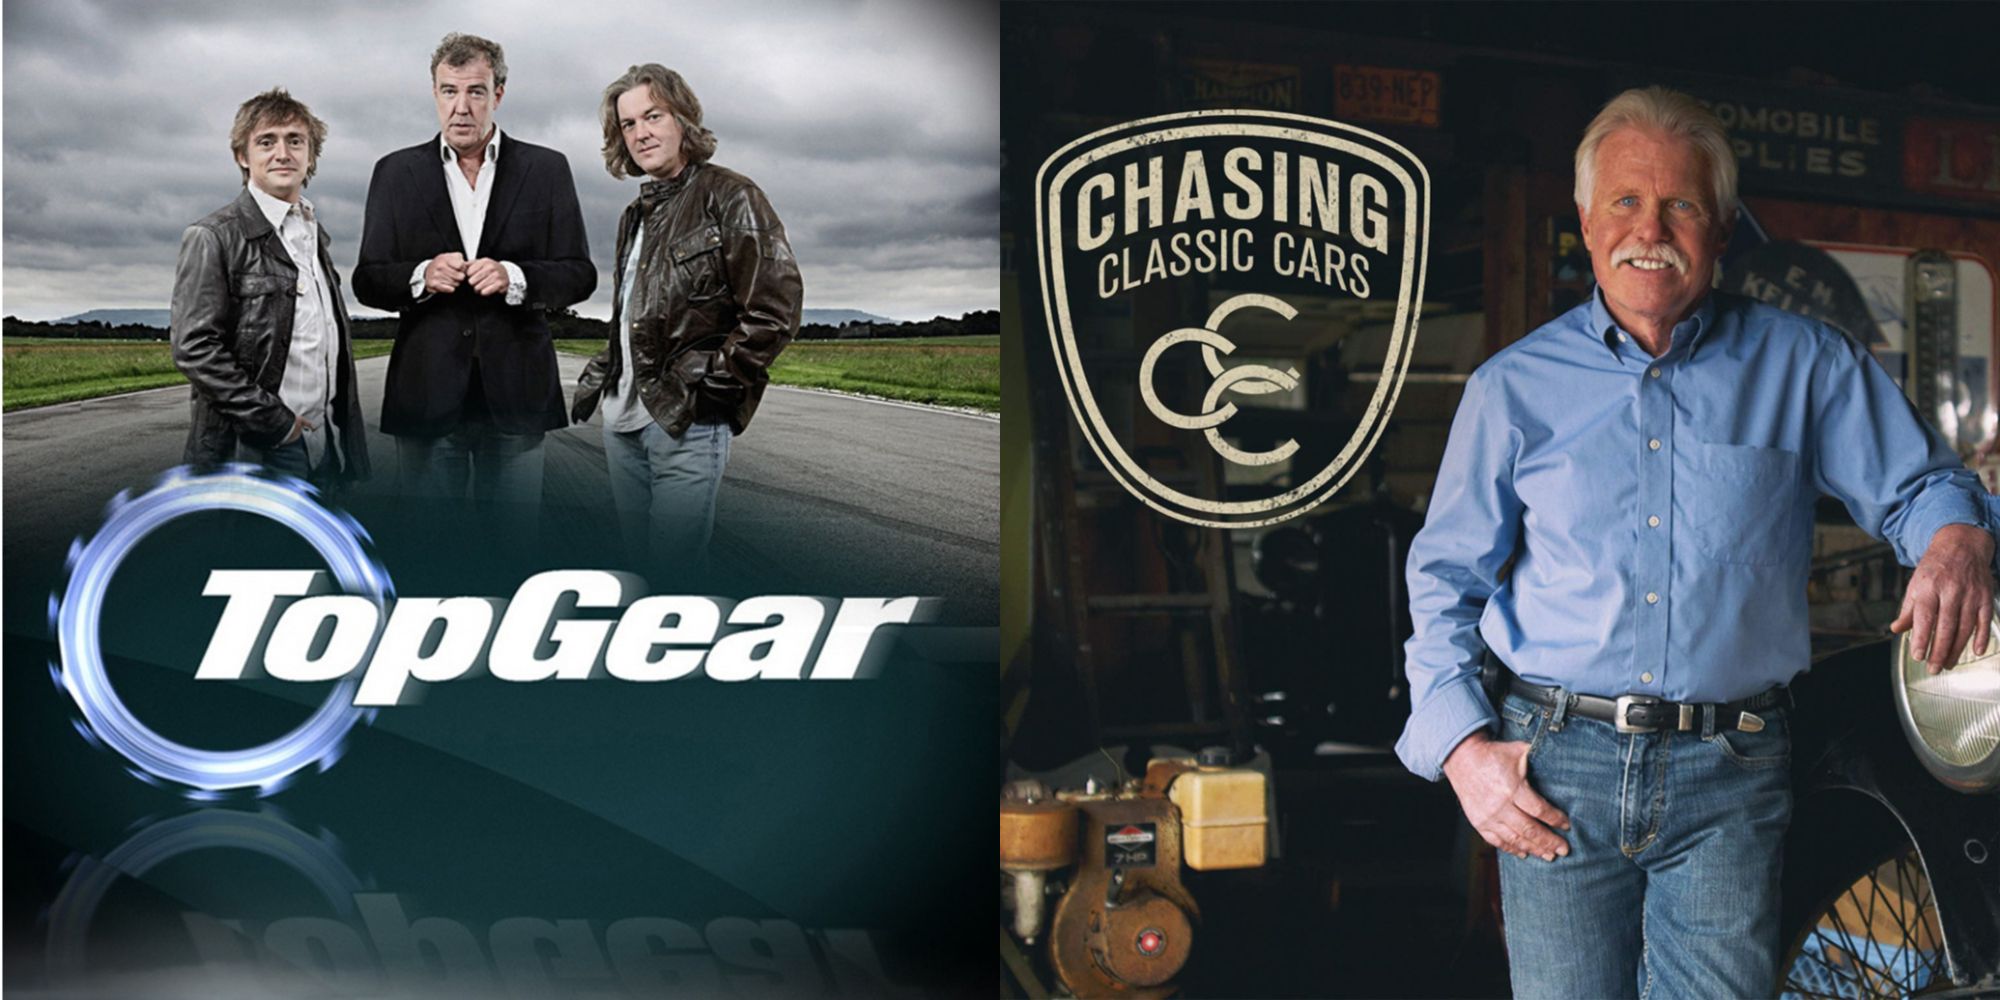 Split image showing posters for the shows Top Gear and Chasing Classic Cars.